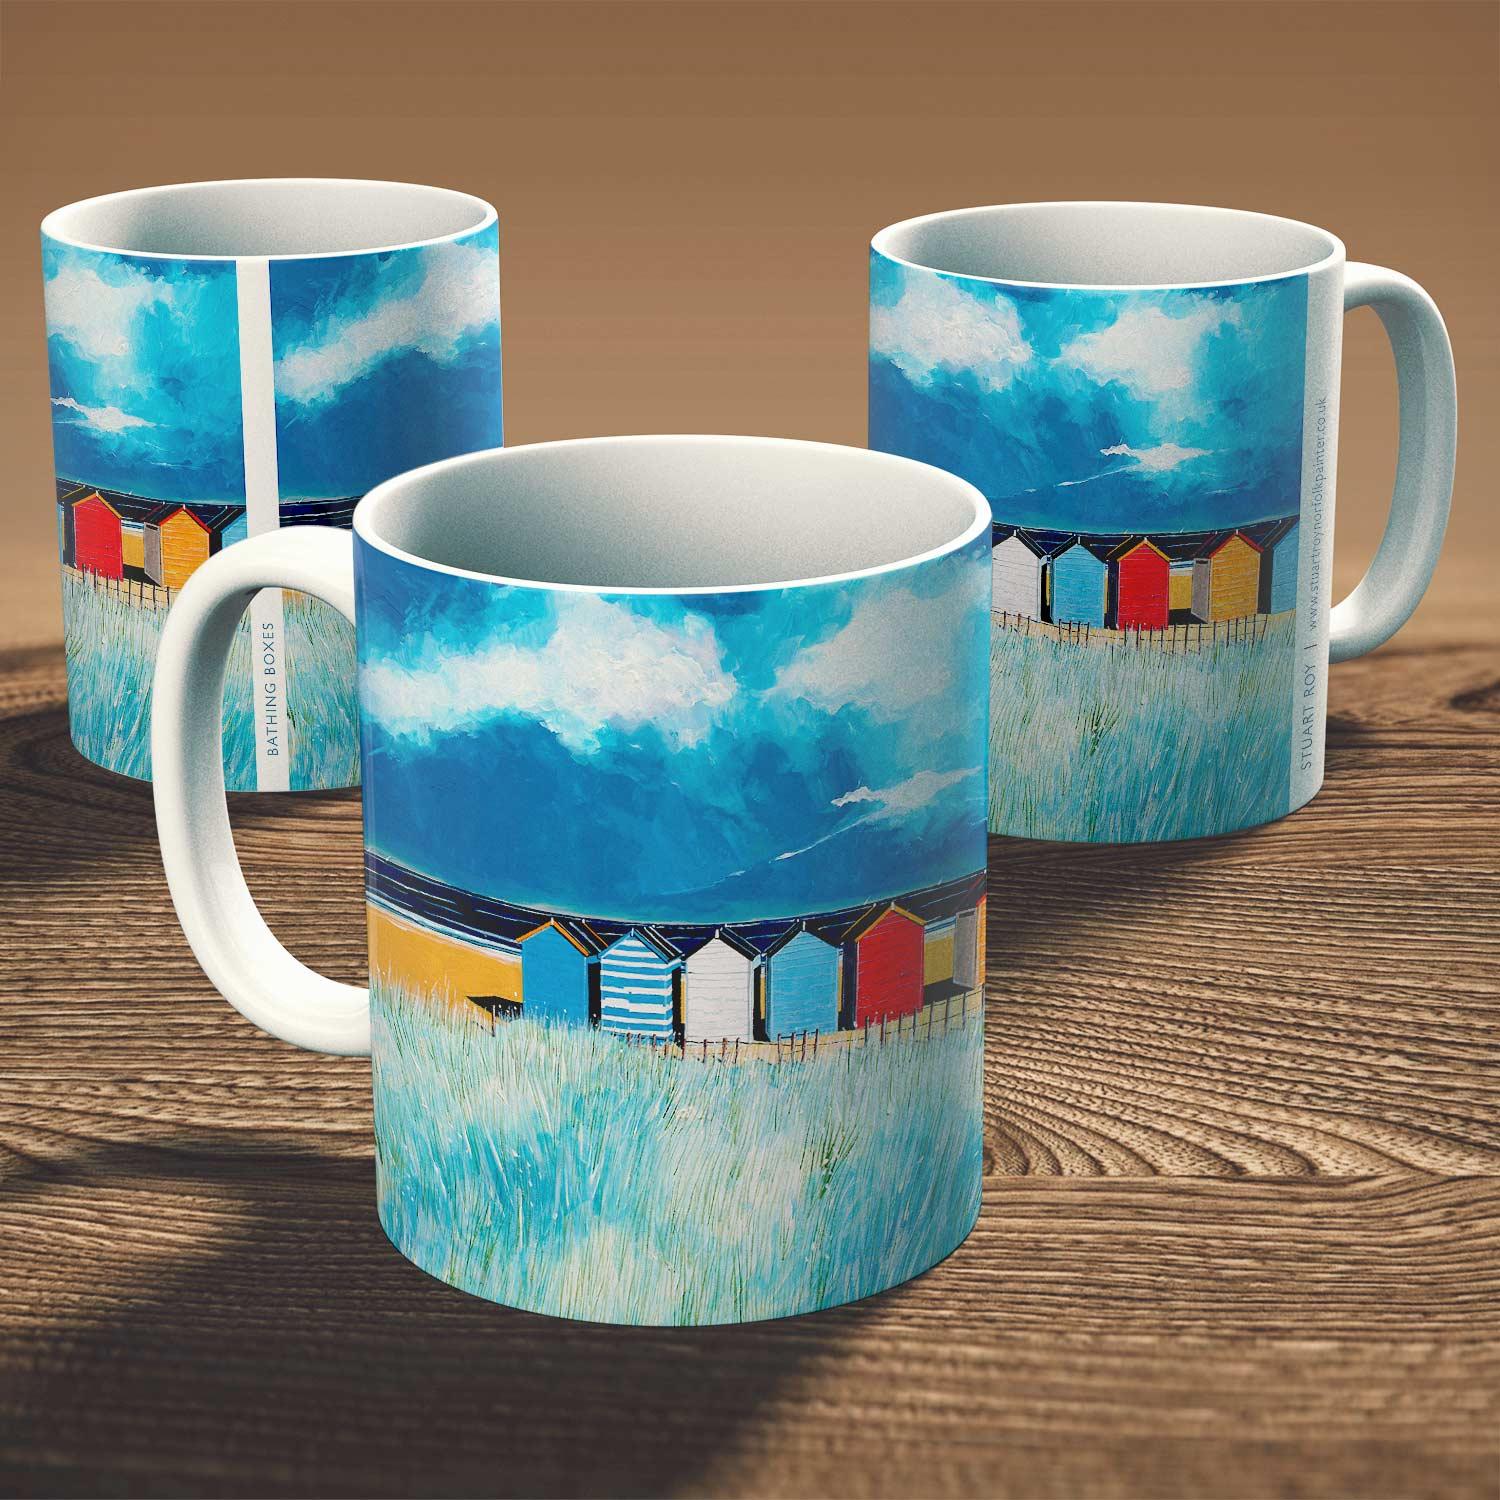 Bathing Boxes Mug from an original painting by artist Stuart Roy